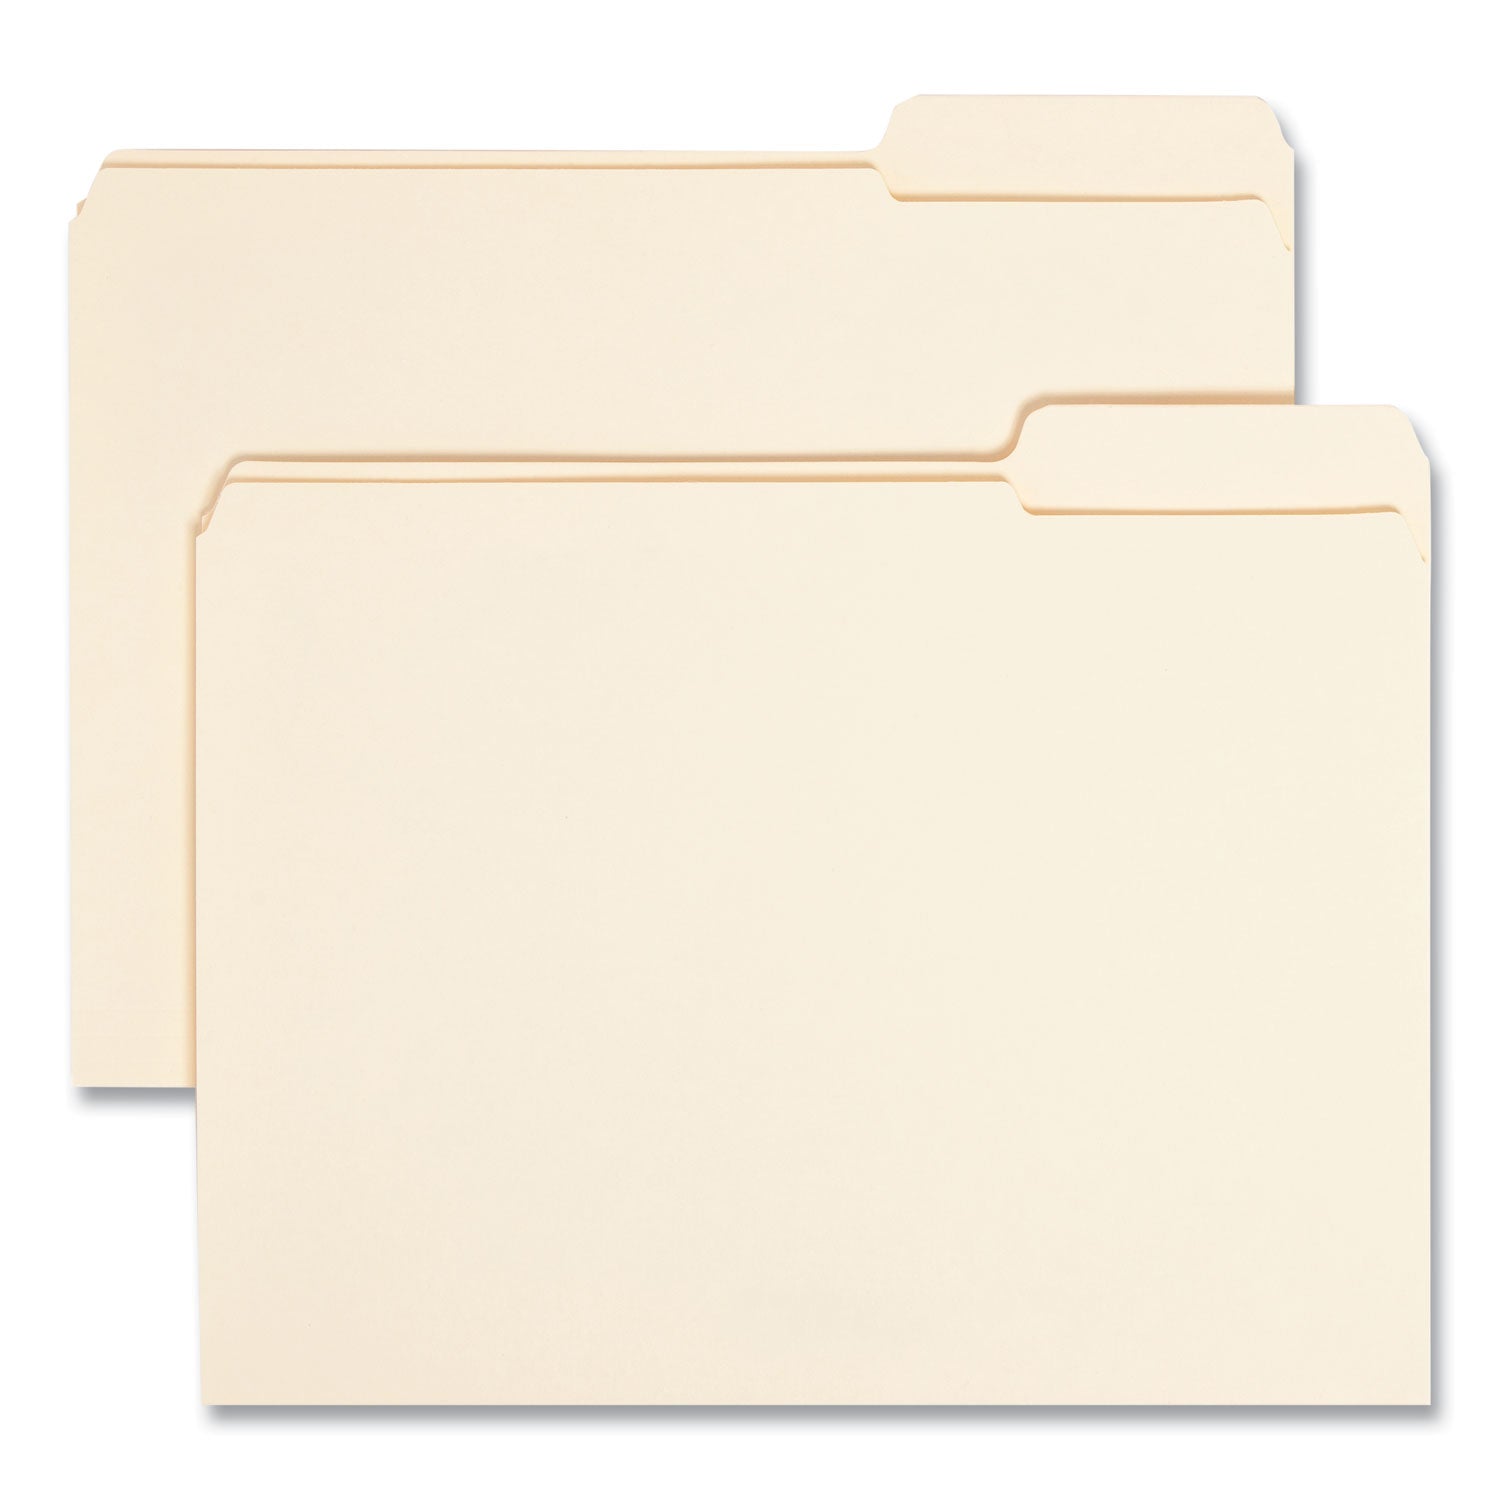 Reinforced Tab Manila File Folders, 1/3-Cut Tabs: Right Position, Letter Size, 0.75" Expansion, 11-pt Manila, 100/Box - 